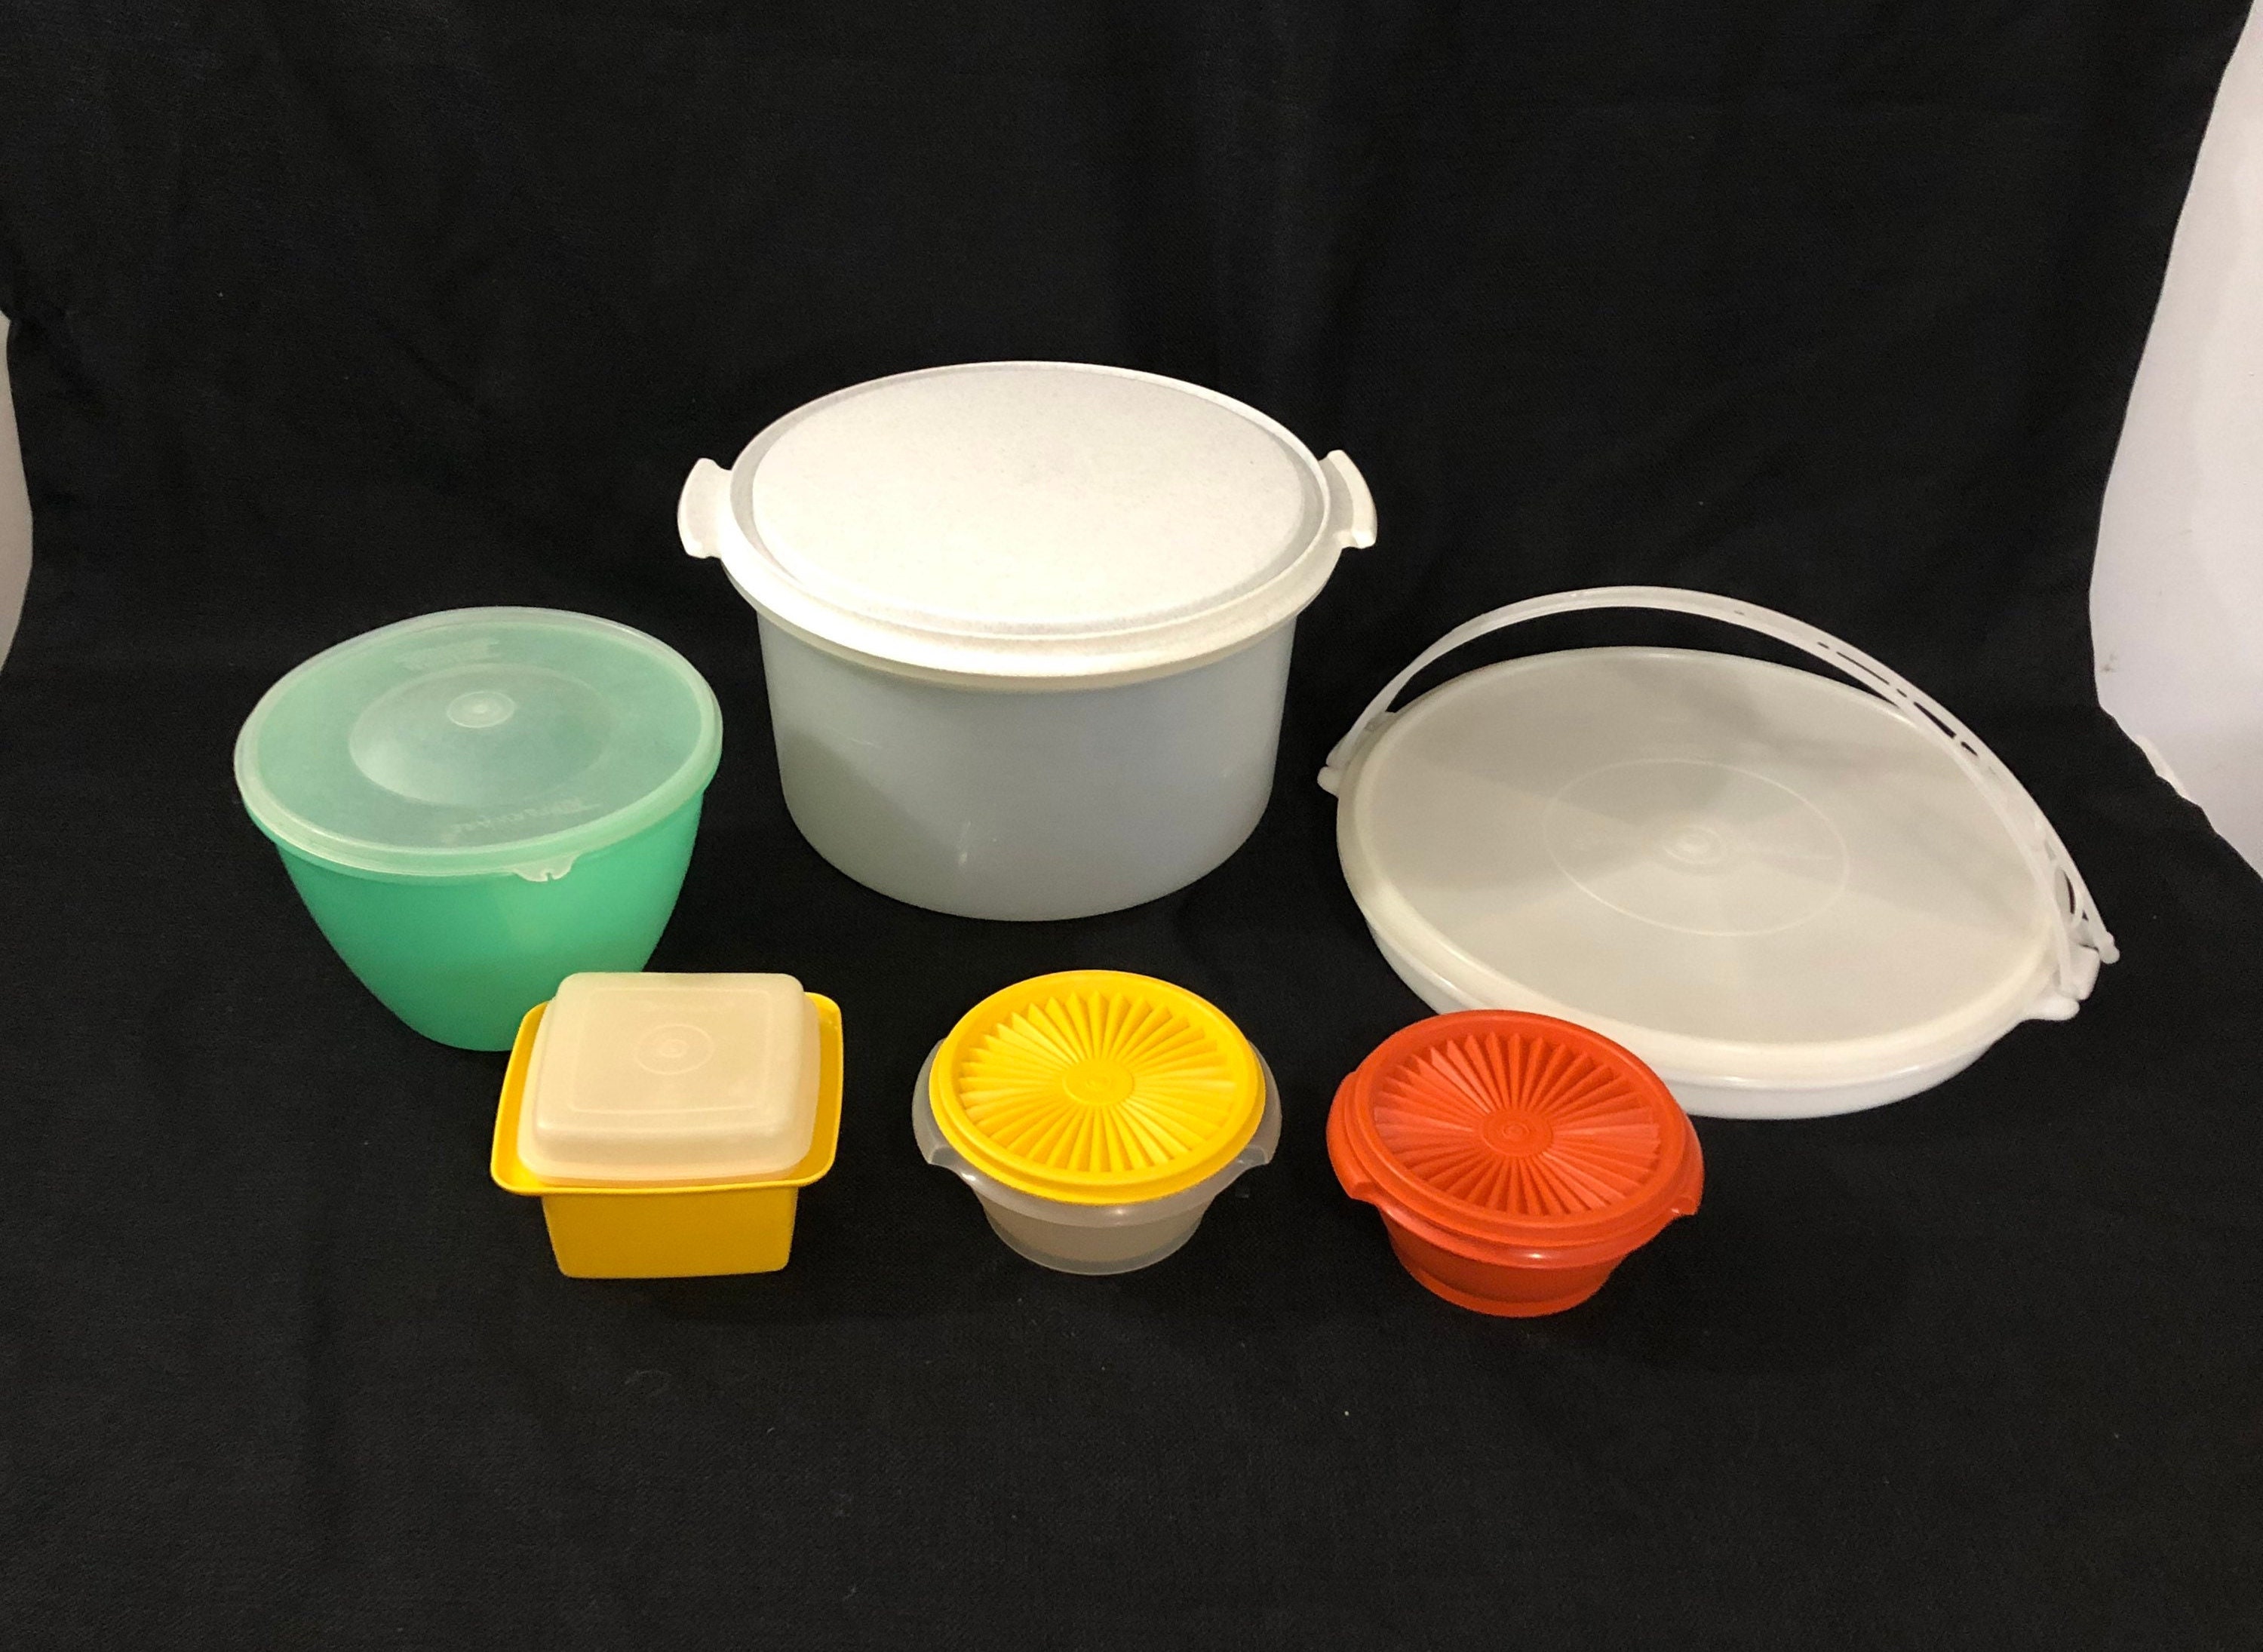 Tupperware CLASSIC SMALL CONTAINERS 6 Piece Set Includes Two Each